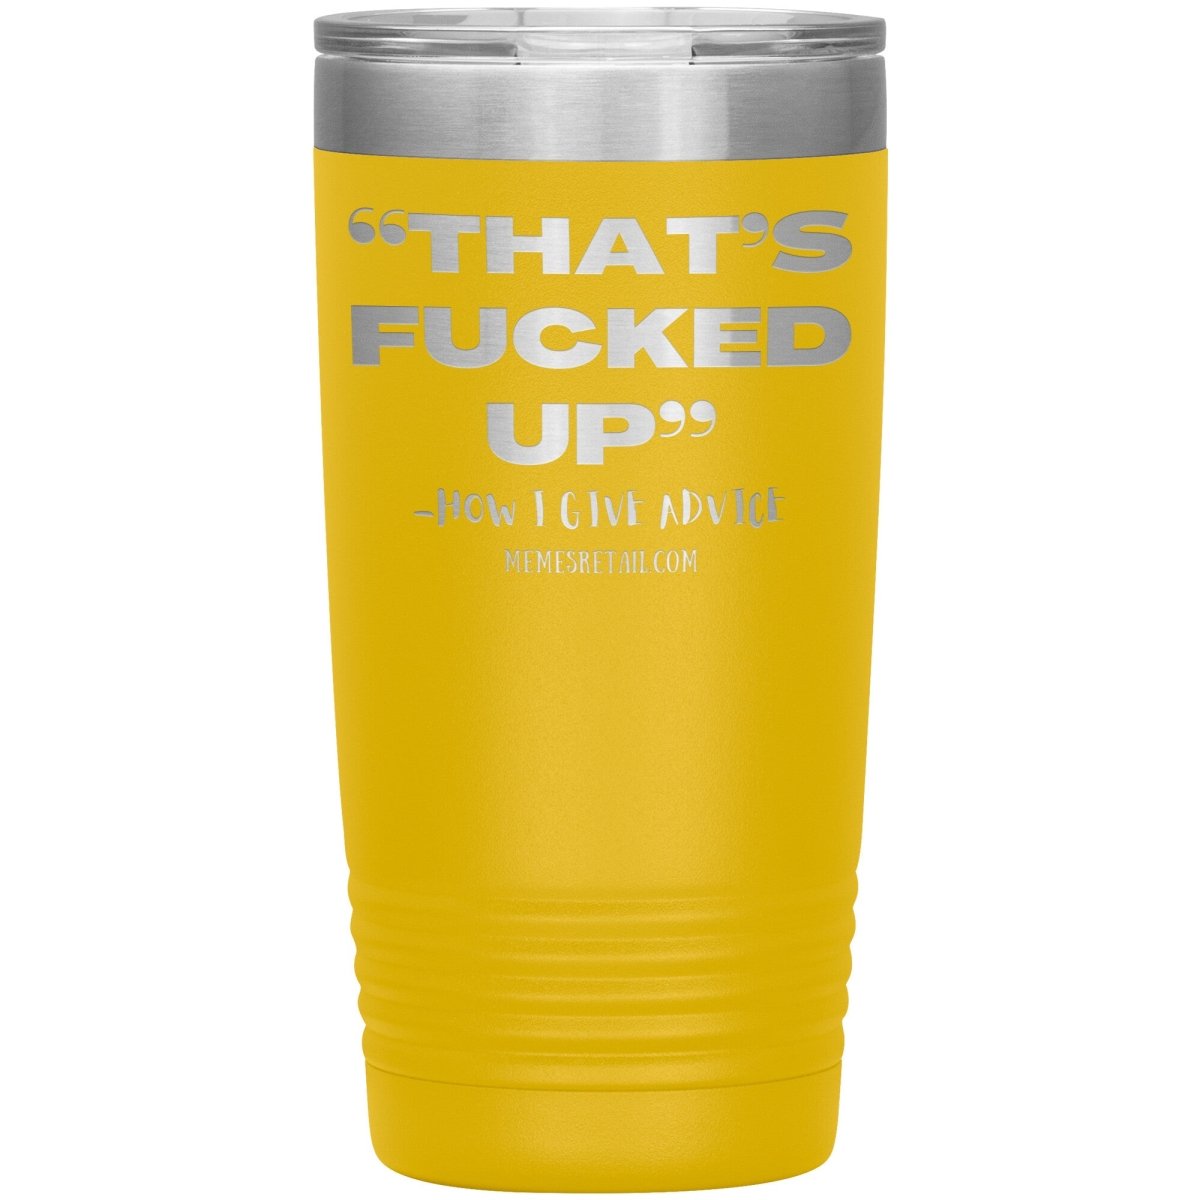 “That’s Fucked Up” -how I give advice Tumblers, 20oz Insulated Tumbler / Yellow - MemesRetail.com